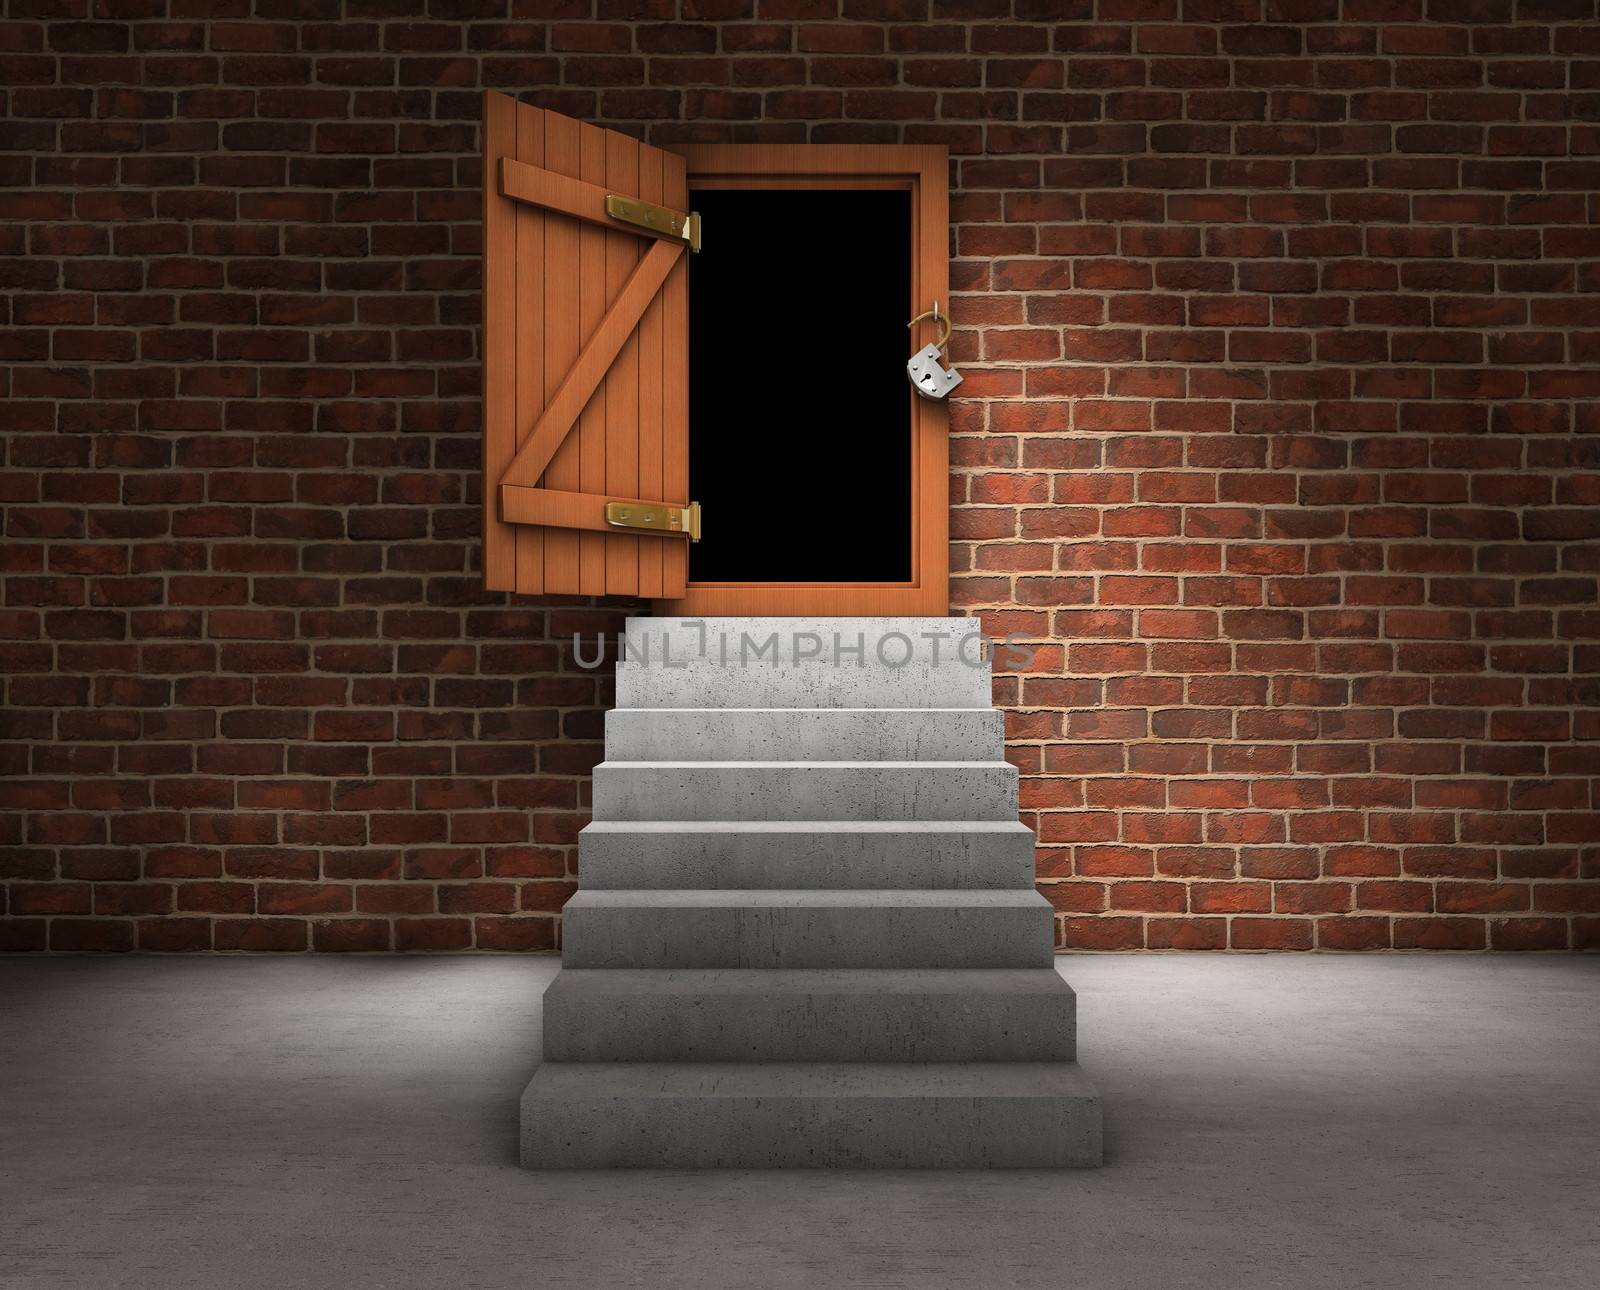 Stairs leading to an opened door with dark outside